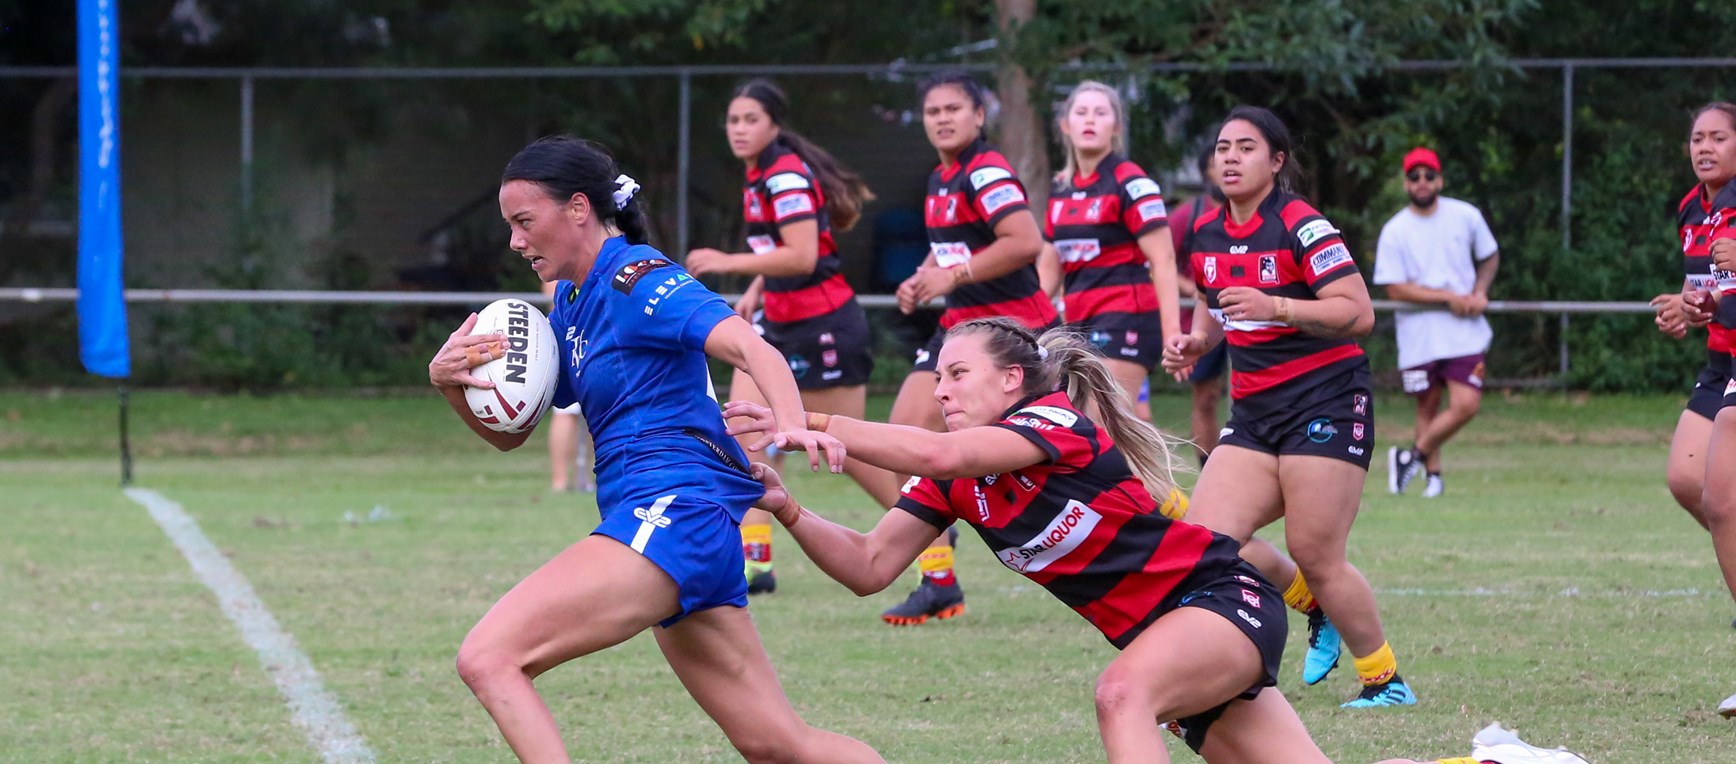 In pictures: BHP Premiership Round 2